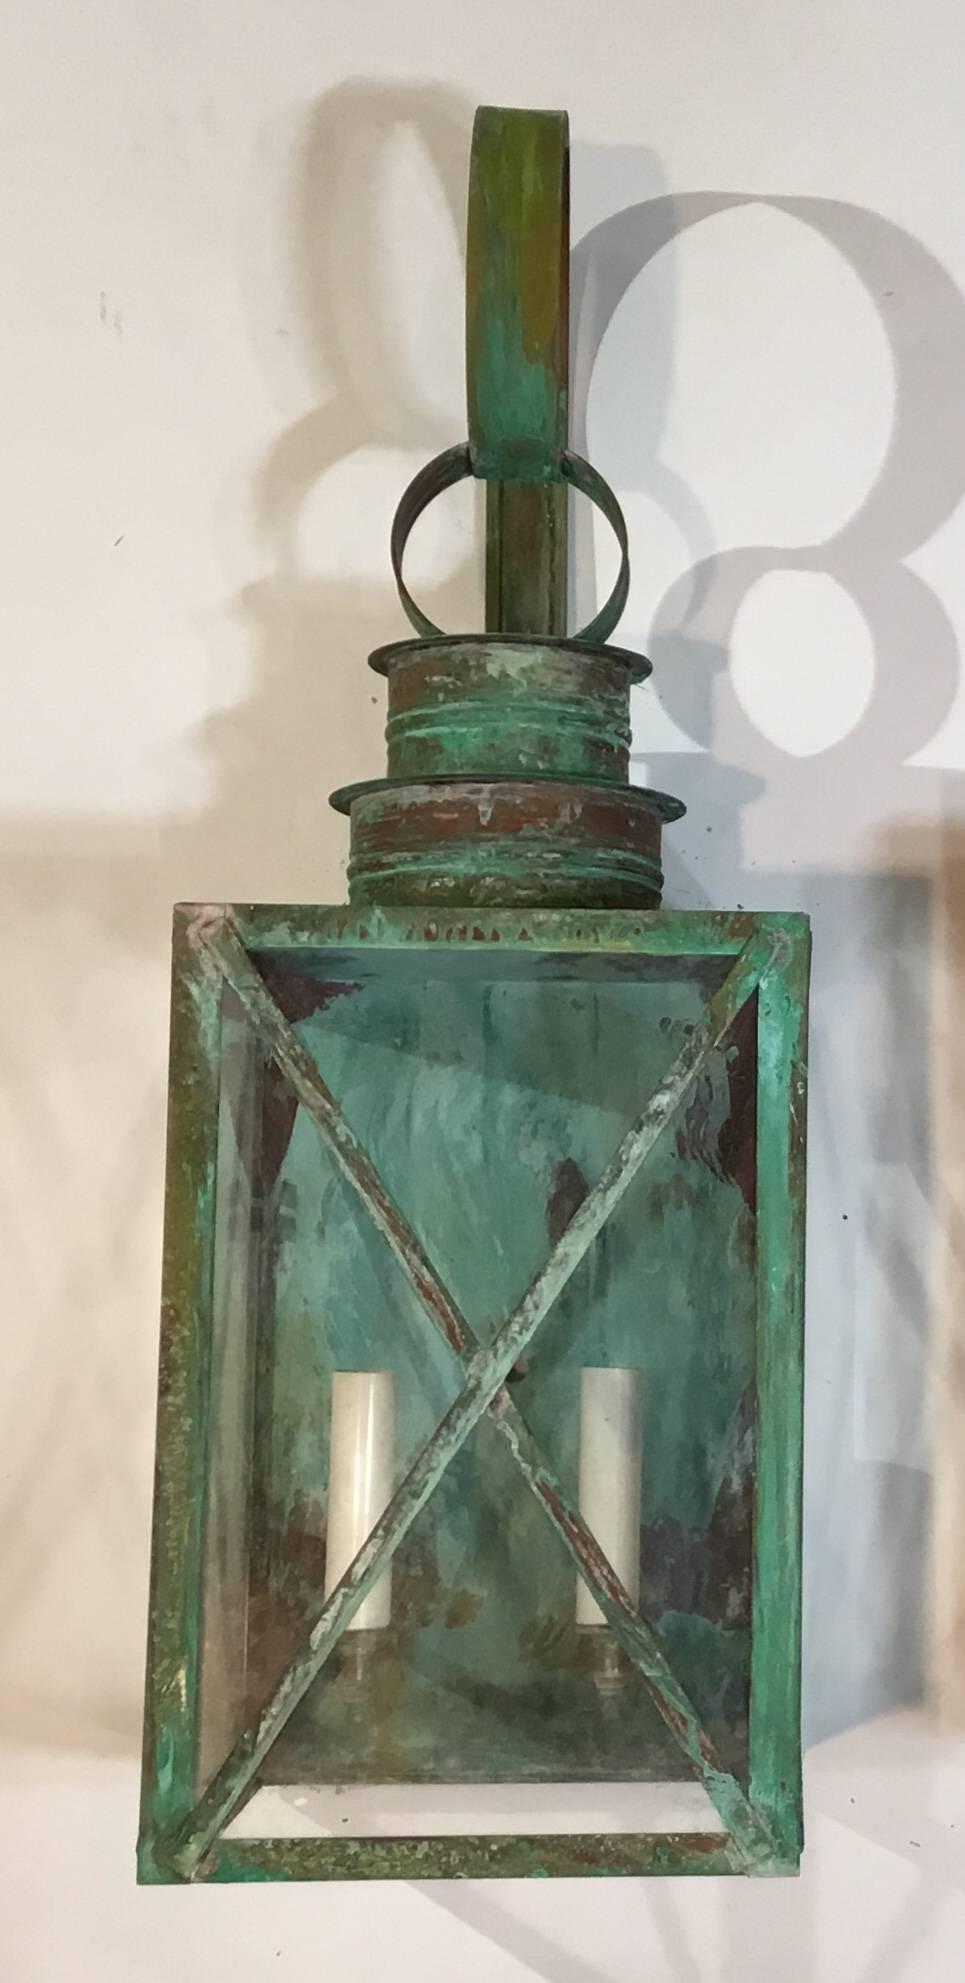 Elagent pair of wall hanging lantern made of copper with beautiful patina, electrified with two 60/watt lights each, UL approved up to US code, suitable for wet locations, great for house entry,
Or even beautiful indoor.
   